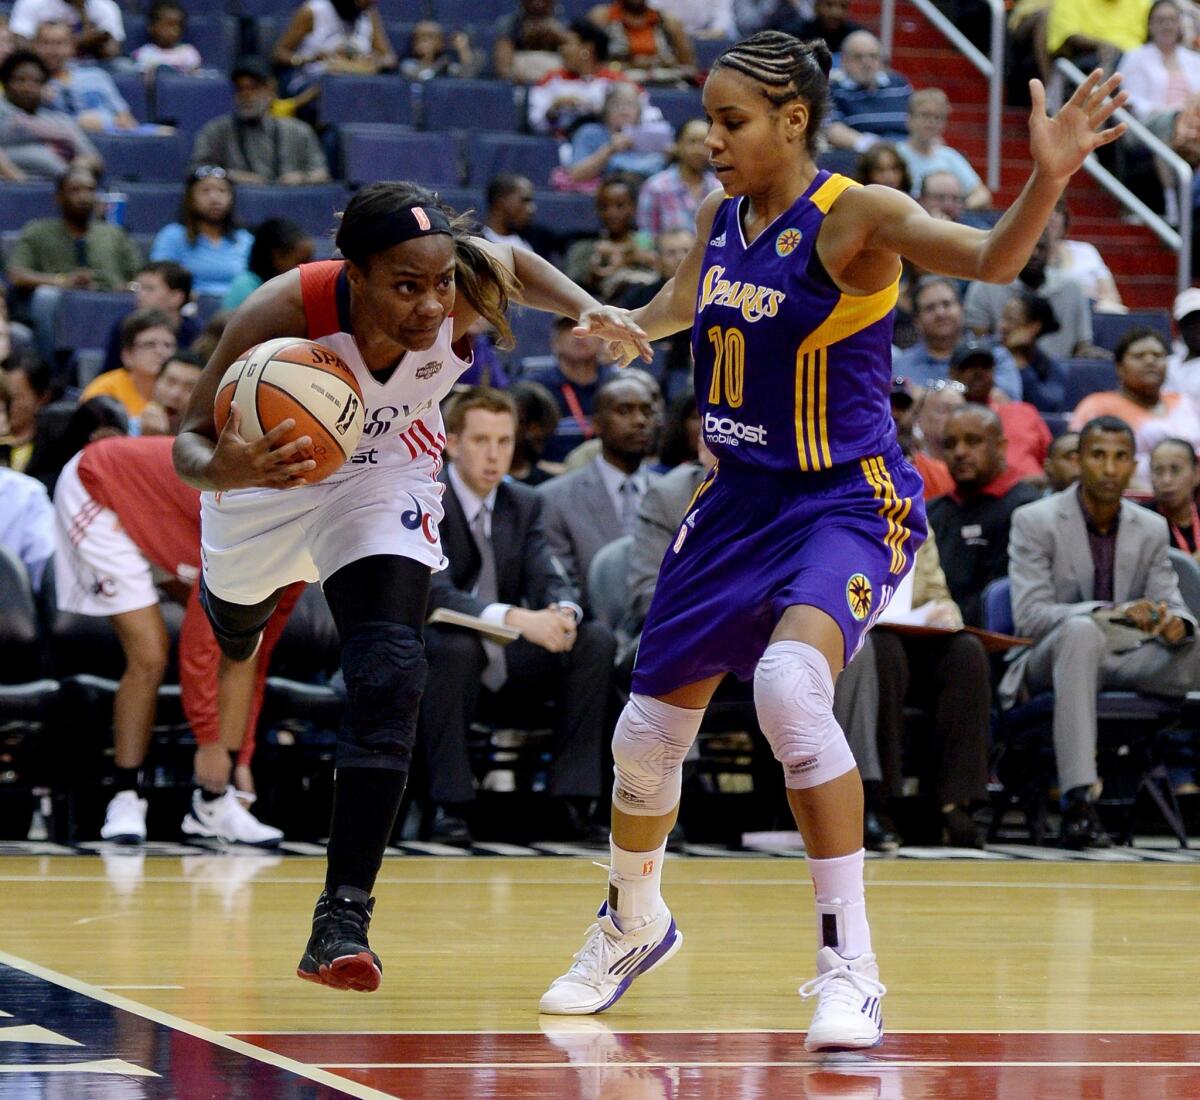 Washington's Ivory Latta, left, drives past the Sparks' Lindsey Harding, right, during a game June 1.